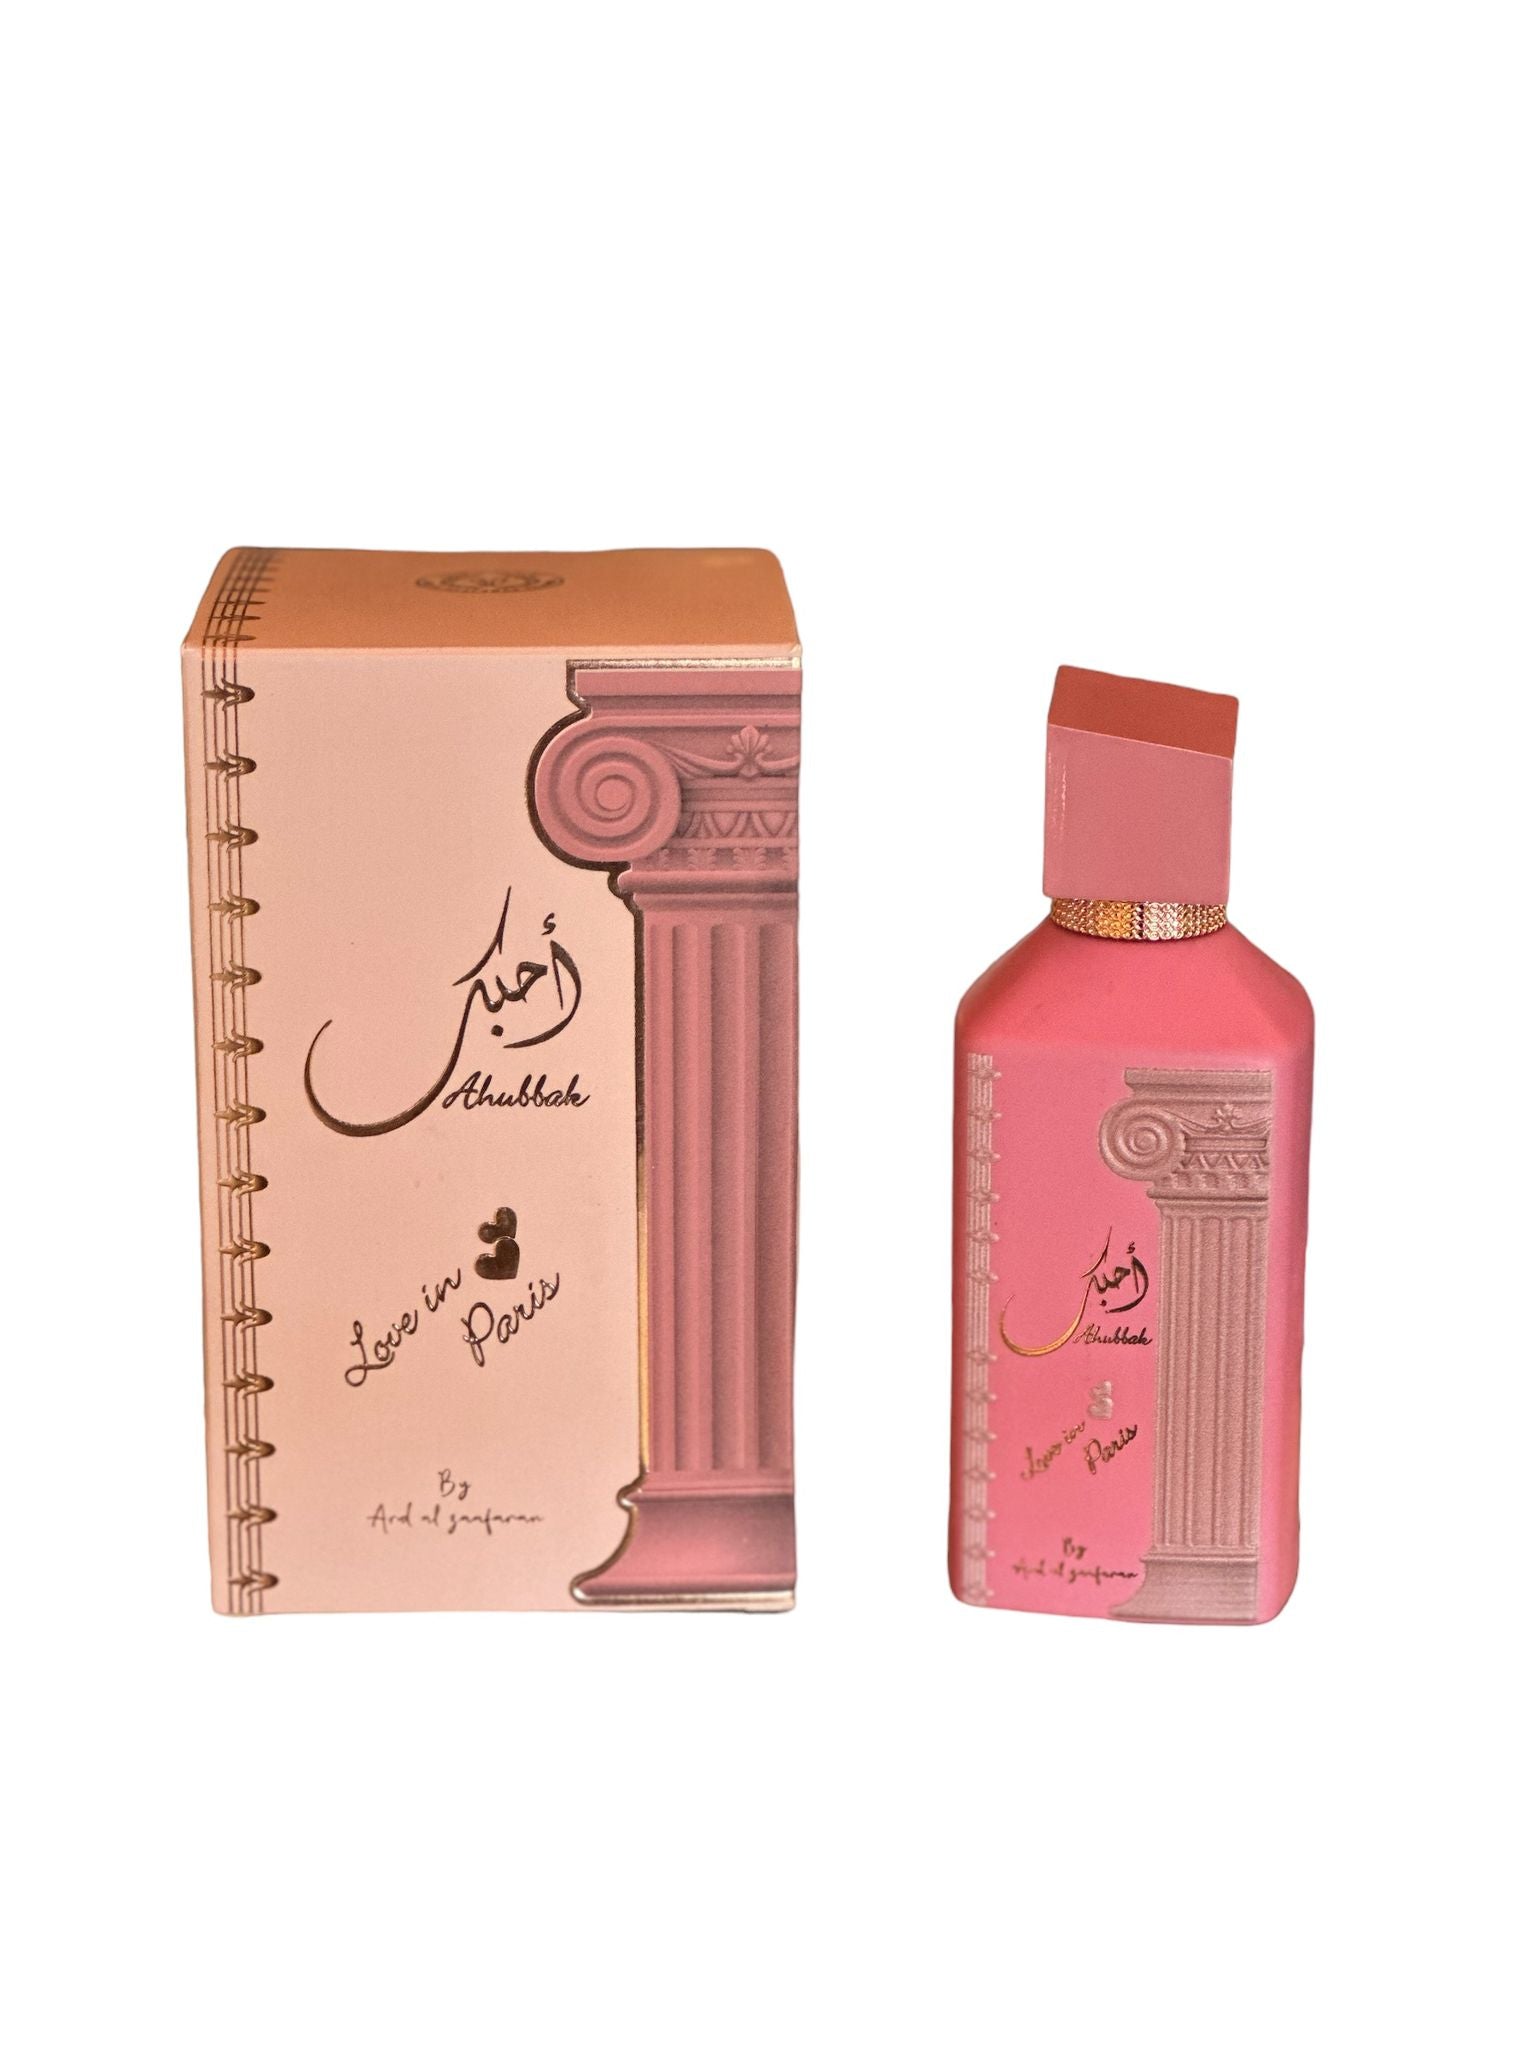 The image shows a set of two products with a cohesive design theme. On the left is a notebook or journal, and on the right appears to be a bottle, possibly of perfume. Both items are primarily in a pastel pink hue. The notebook features a graphic of a classical column along the binding edge, giving it an elegant look, with script writing that suggests the theme "Love in Paris." There is also a signature or designer's mark in a foreign script, possibly Arabic, near the top.